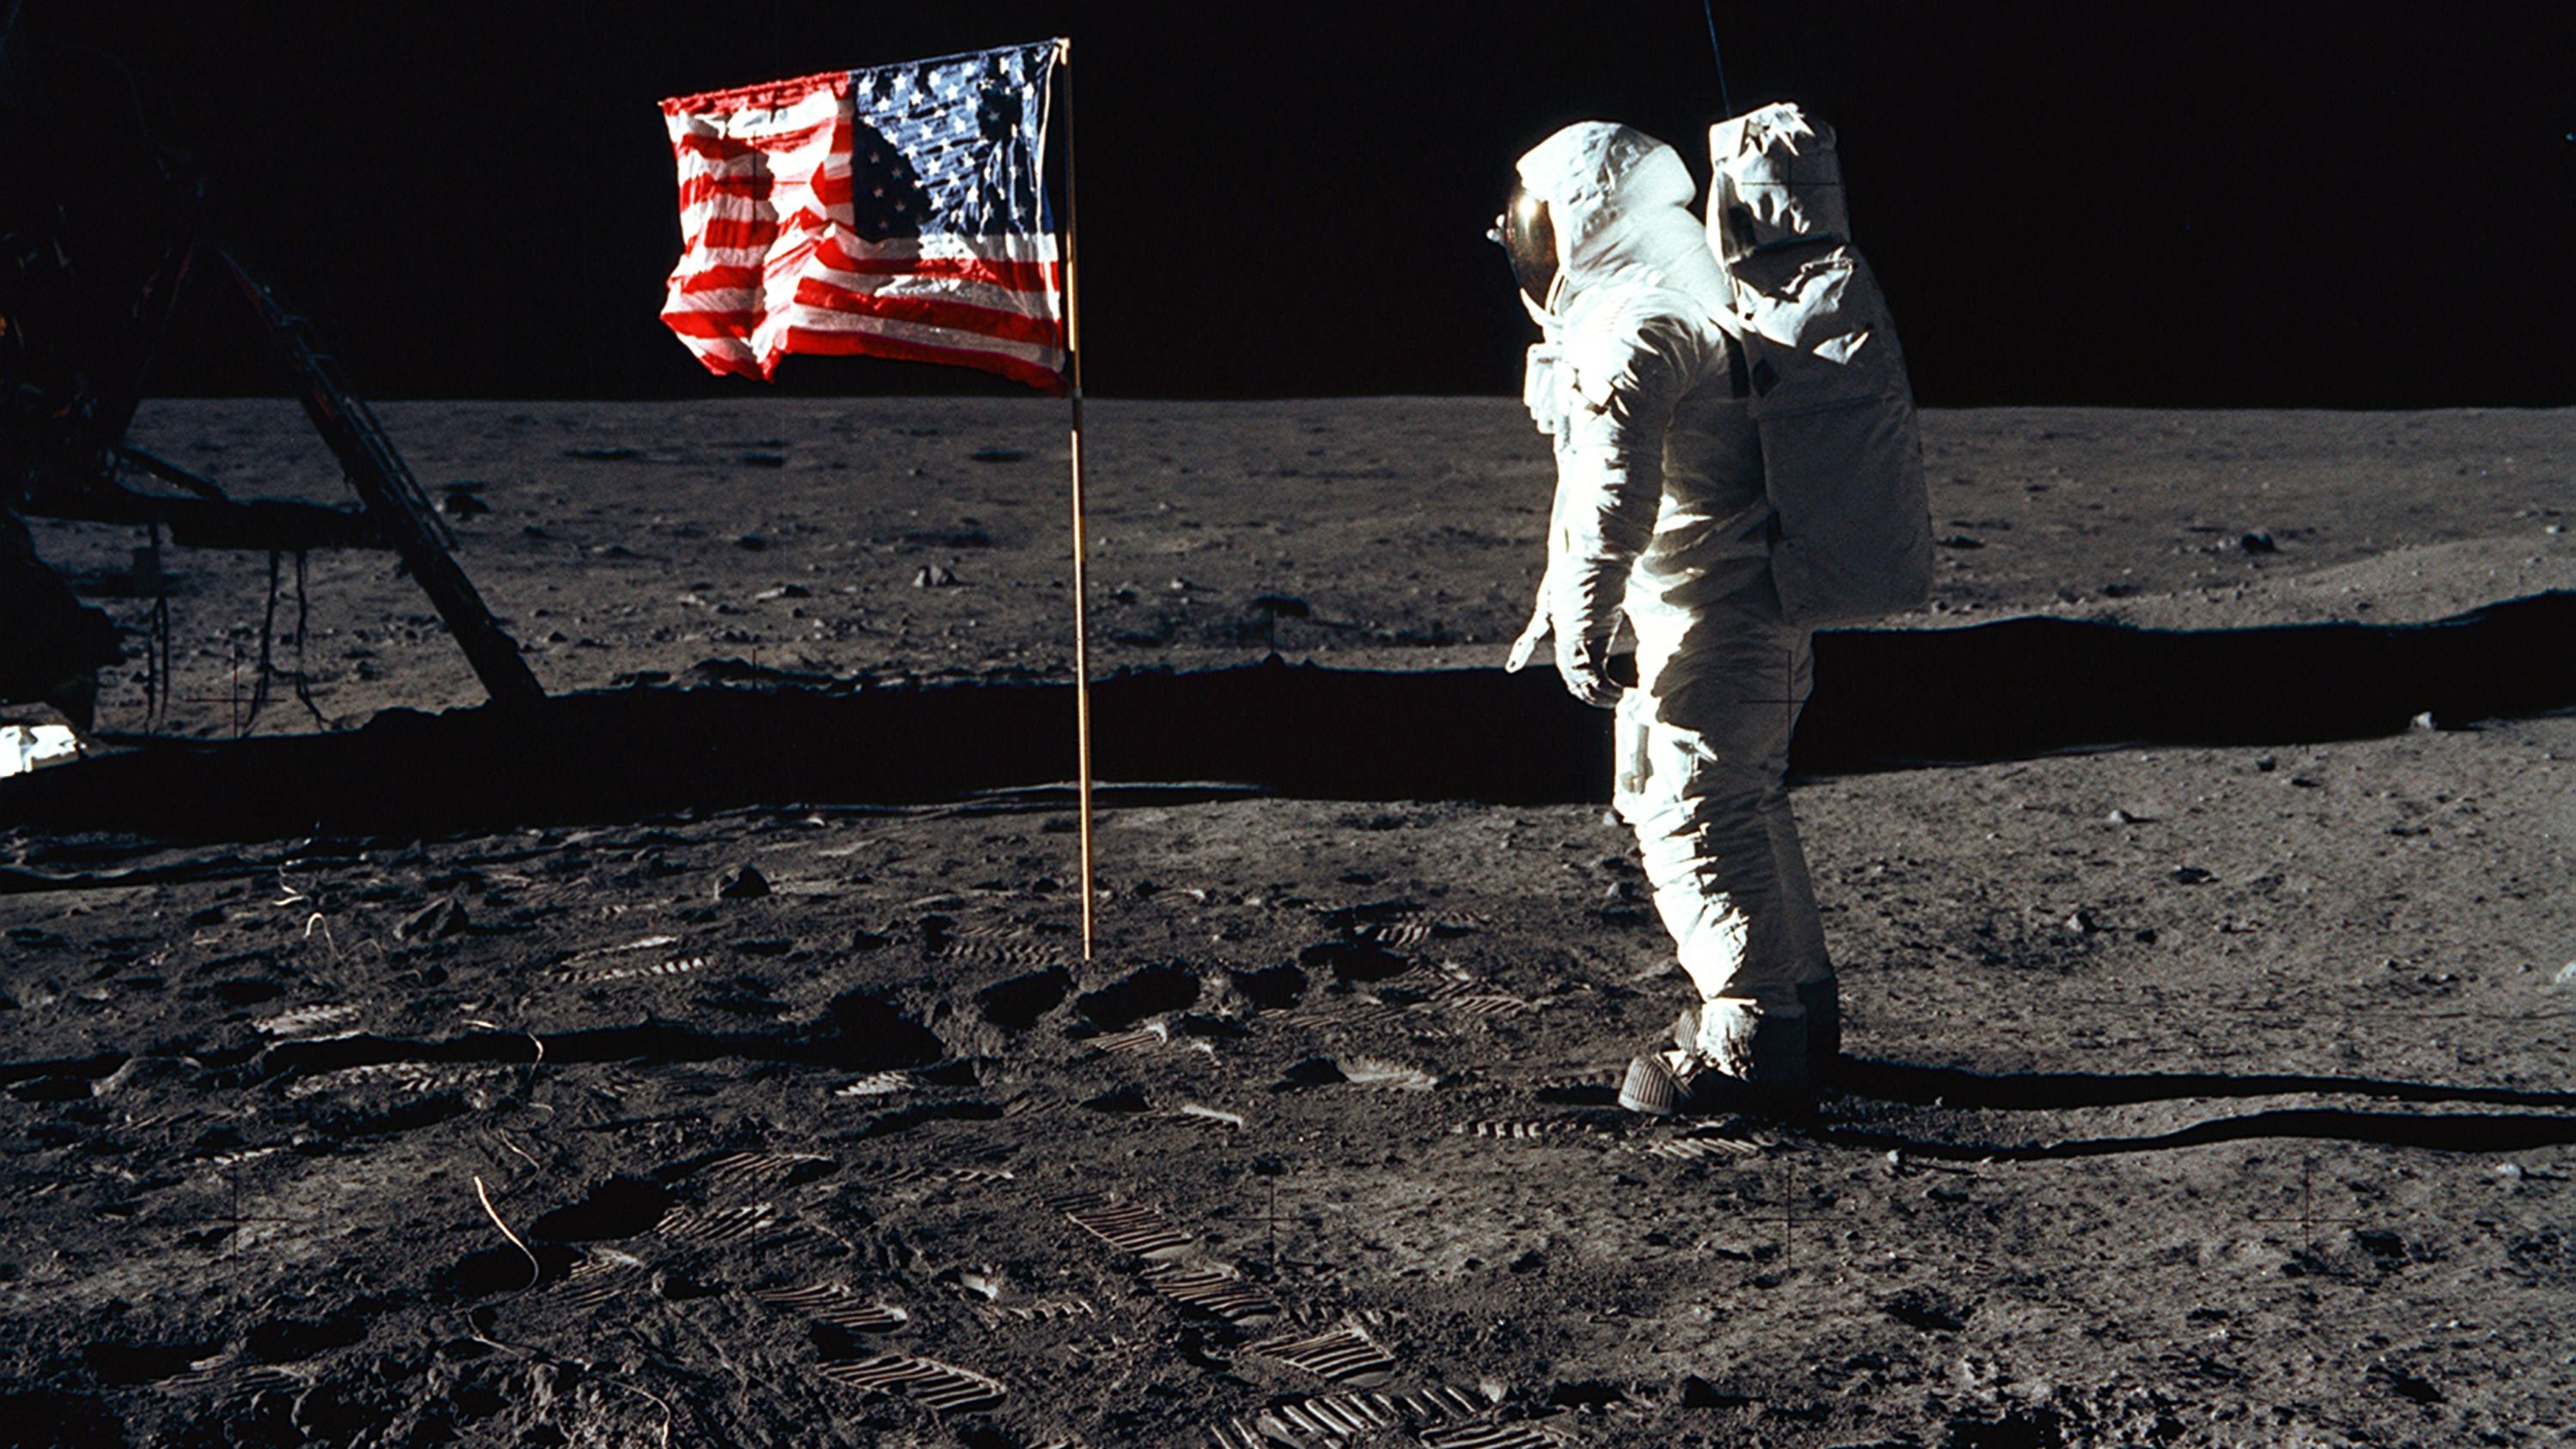 Apollo 11 astronaut Edwin "Buzz" Aldrin salutes the American flag on the surface of the moon on July 20, 1969. Aldrin was the second man to ever step foot on the lunar surface. The first was Neil Armstrong, Apollo 11's mission commander.